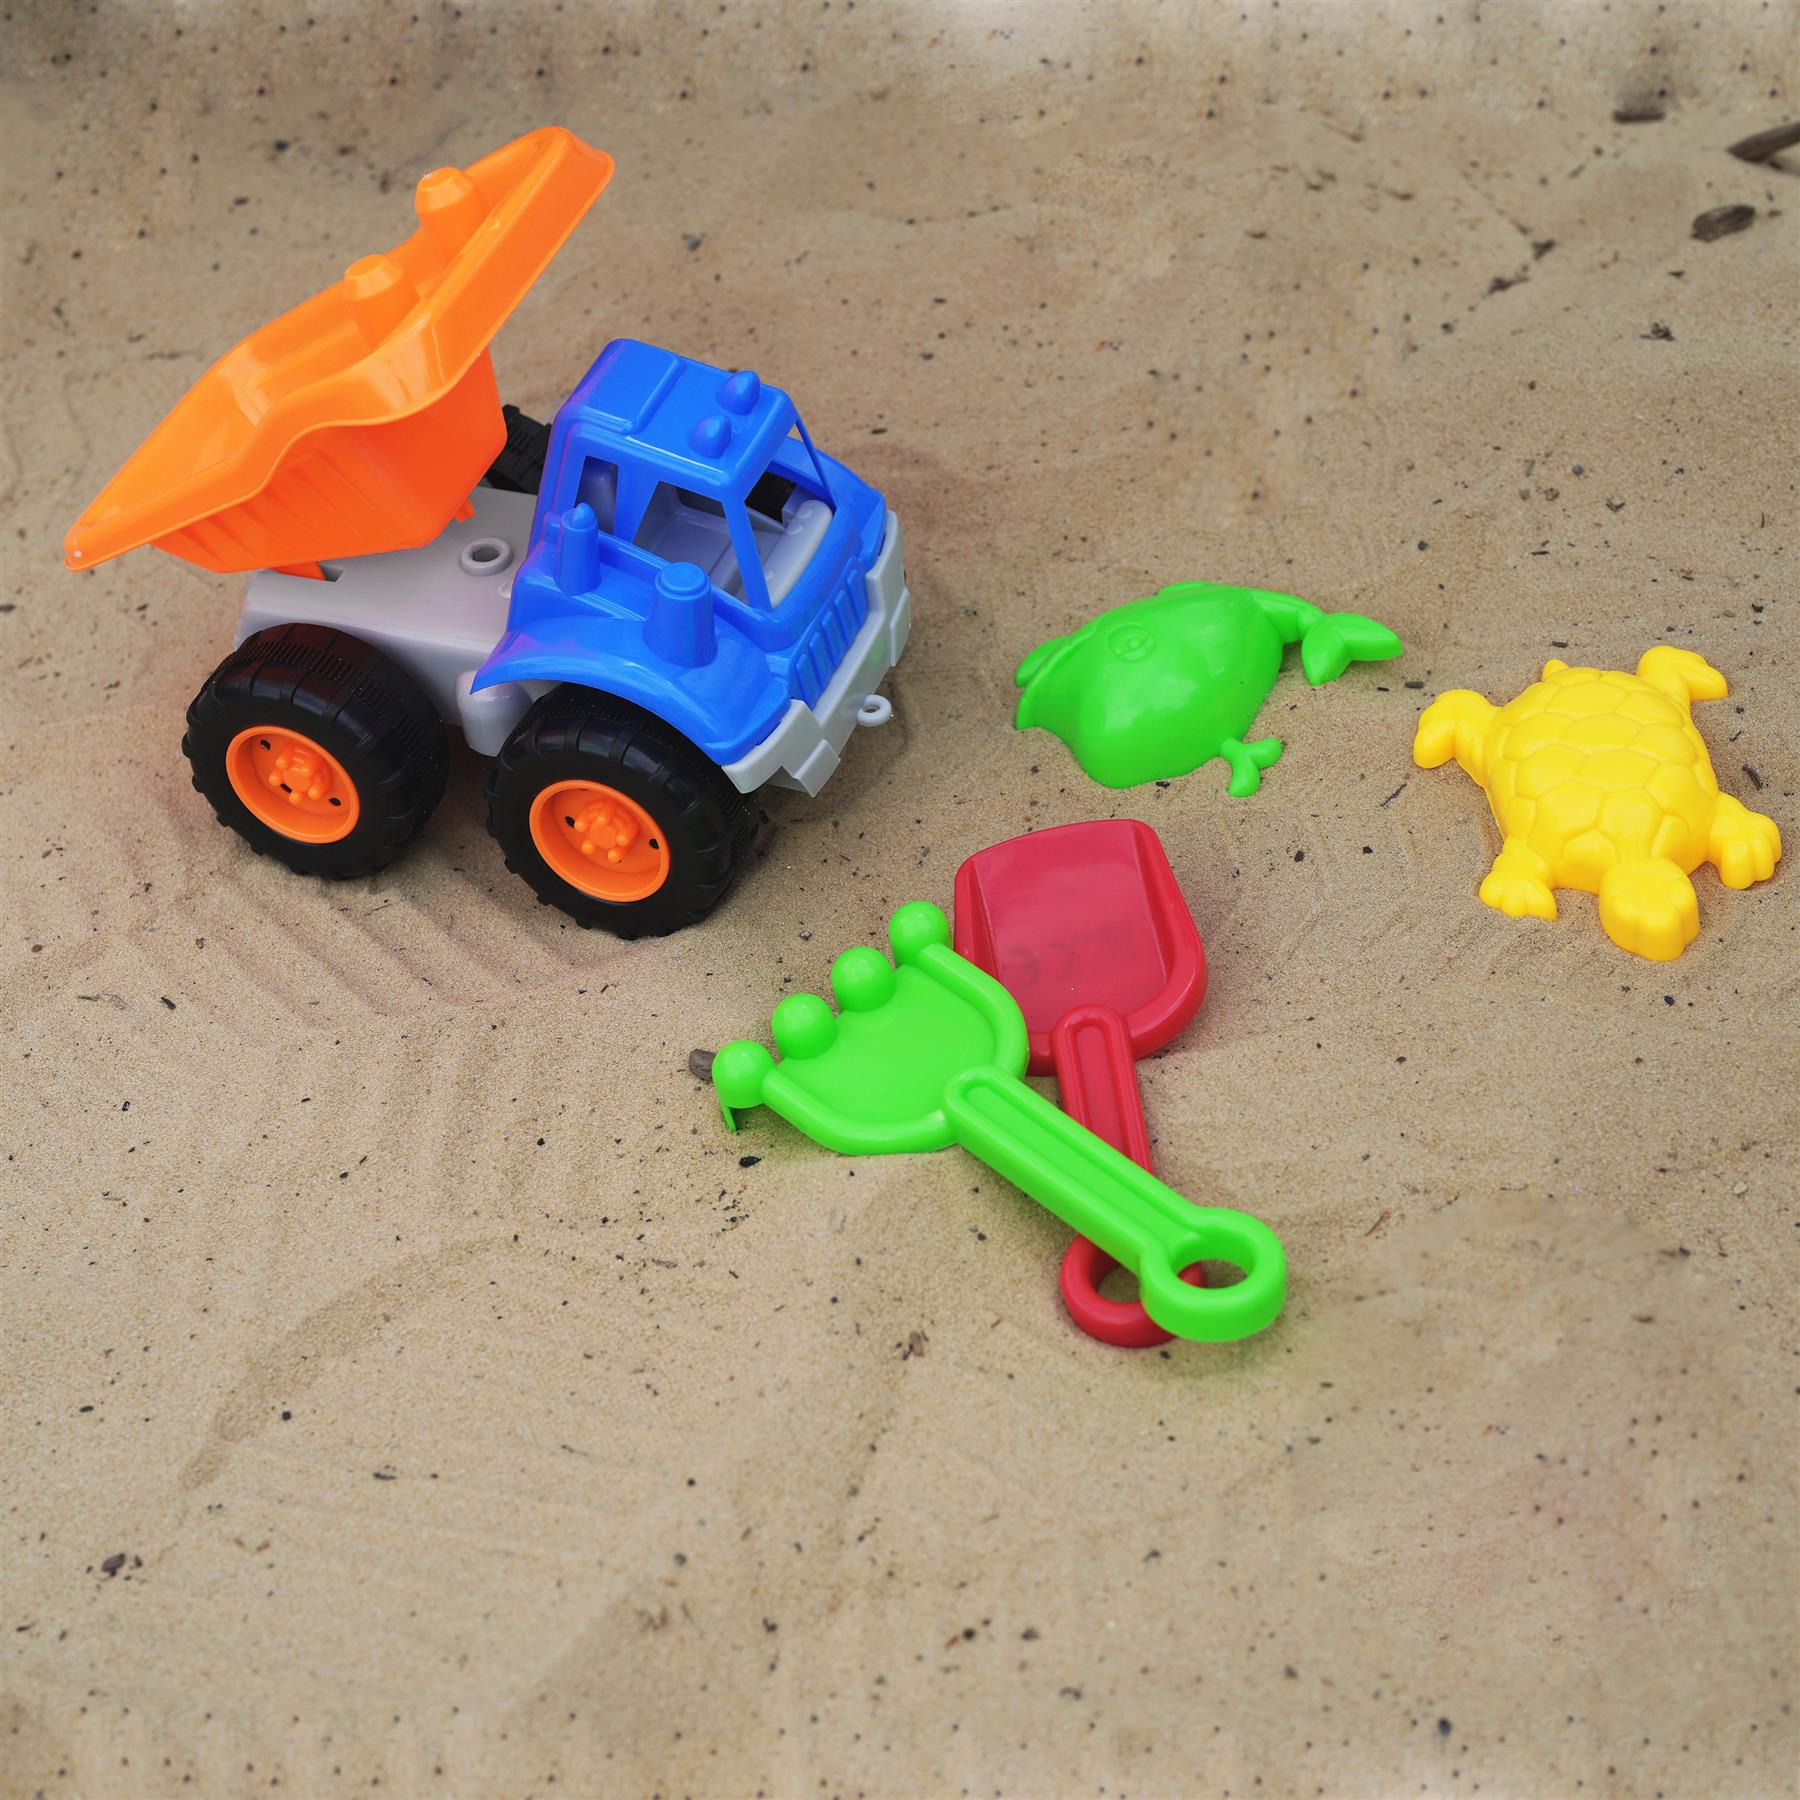 Sand Truck & Accessories Set (5 Pcs.) by The Magic Toy Shop - The Magic Toy Shop